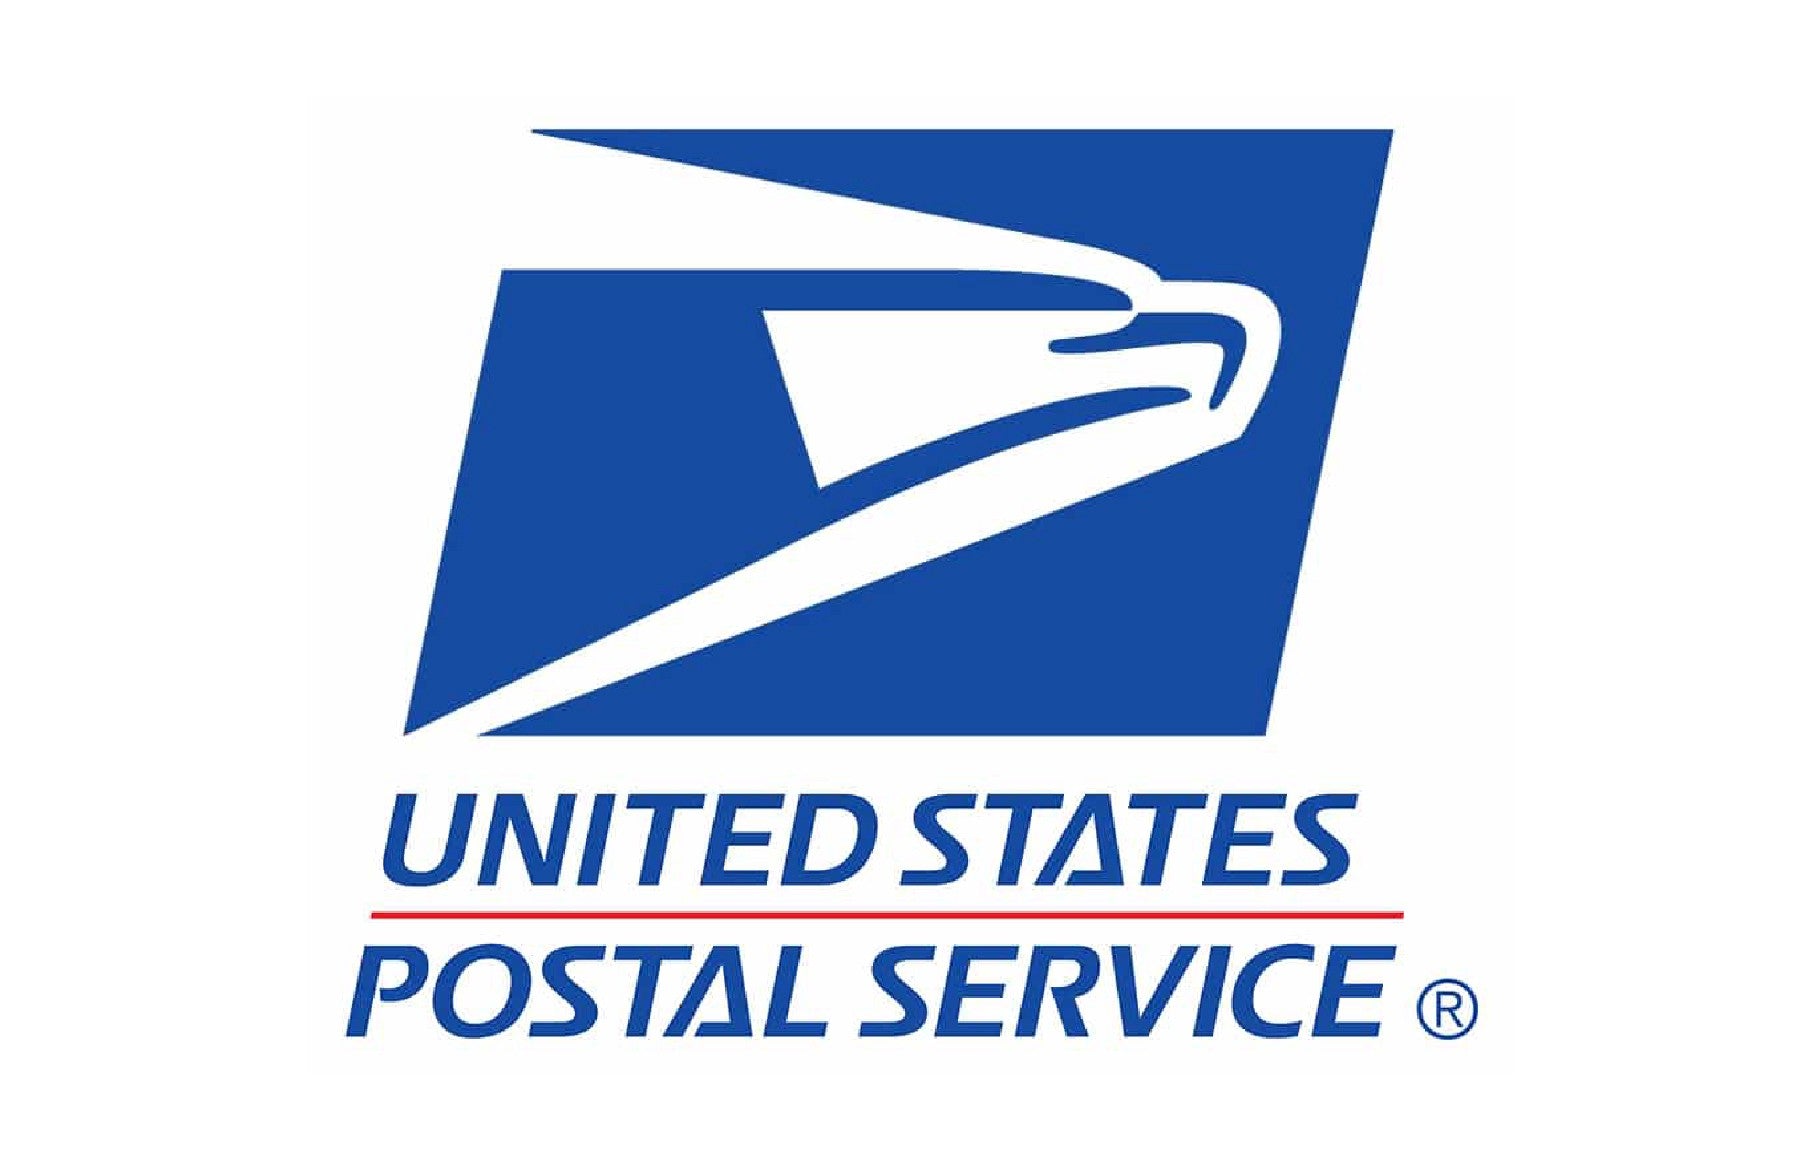 File a claim with USPS